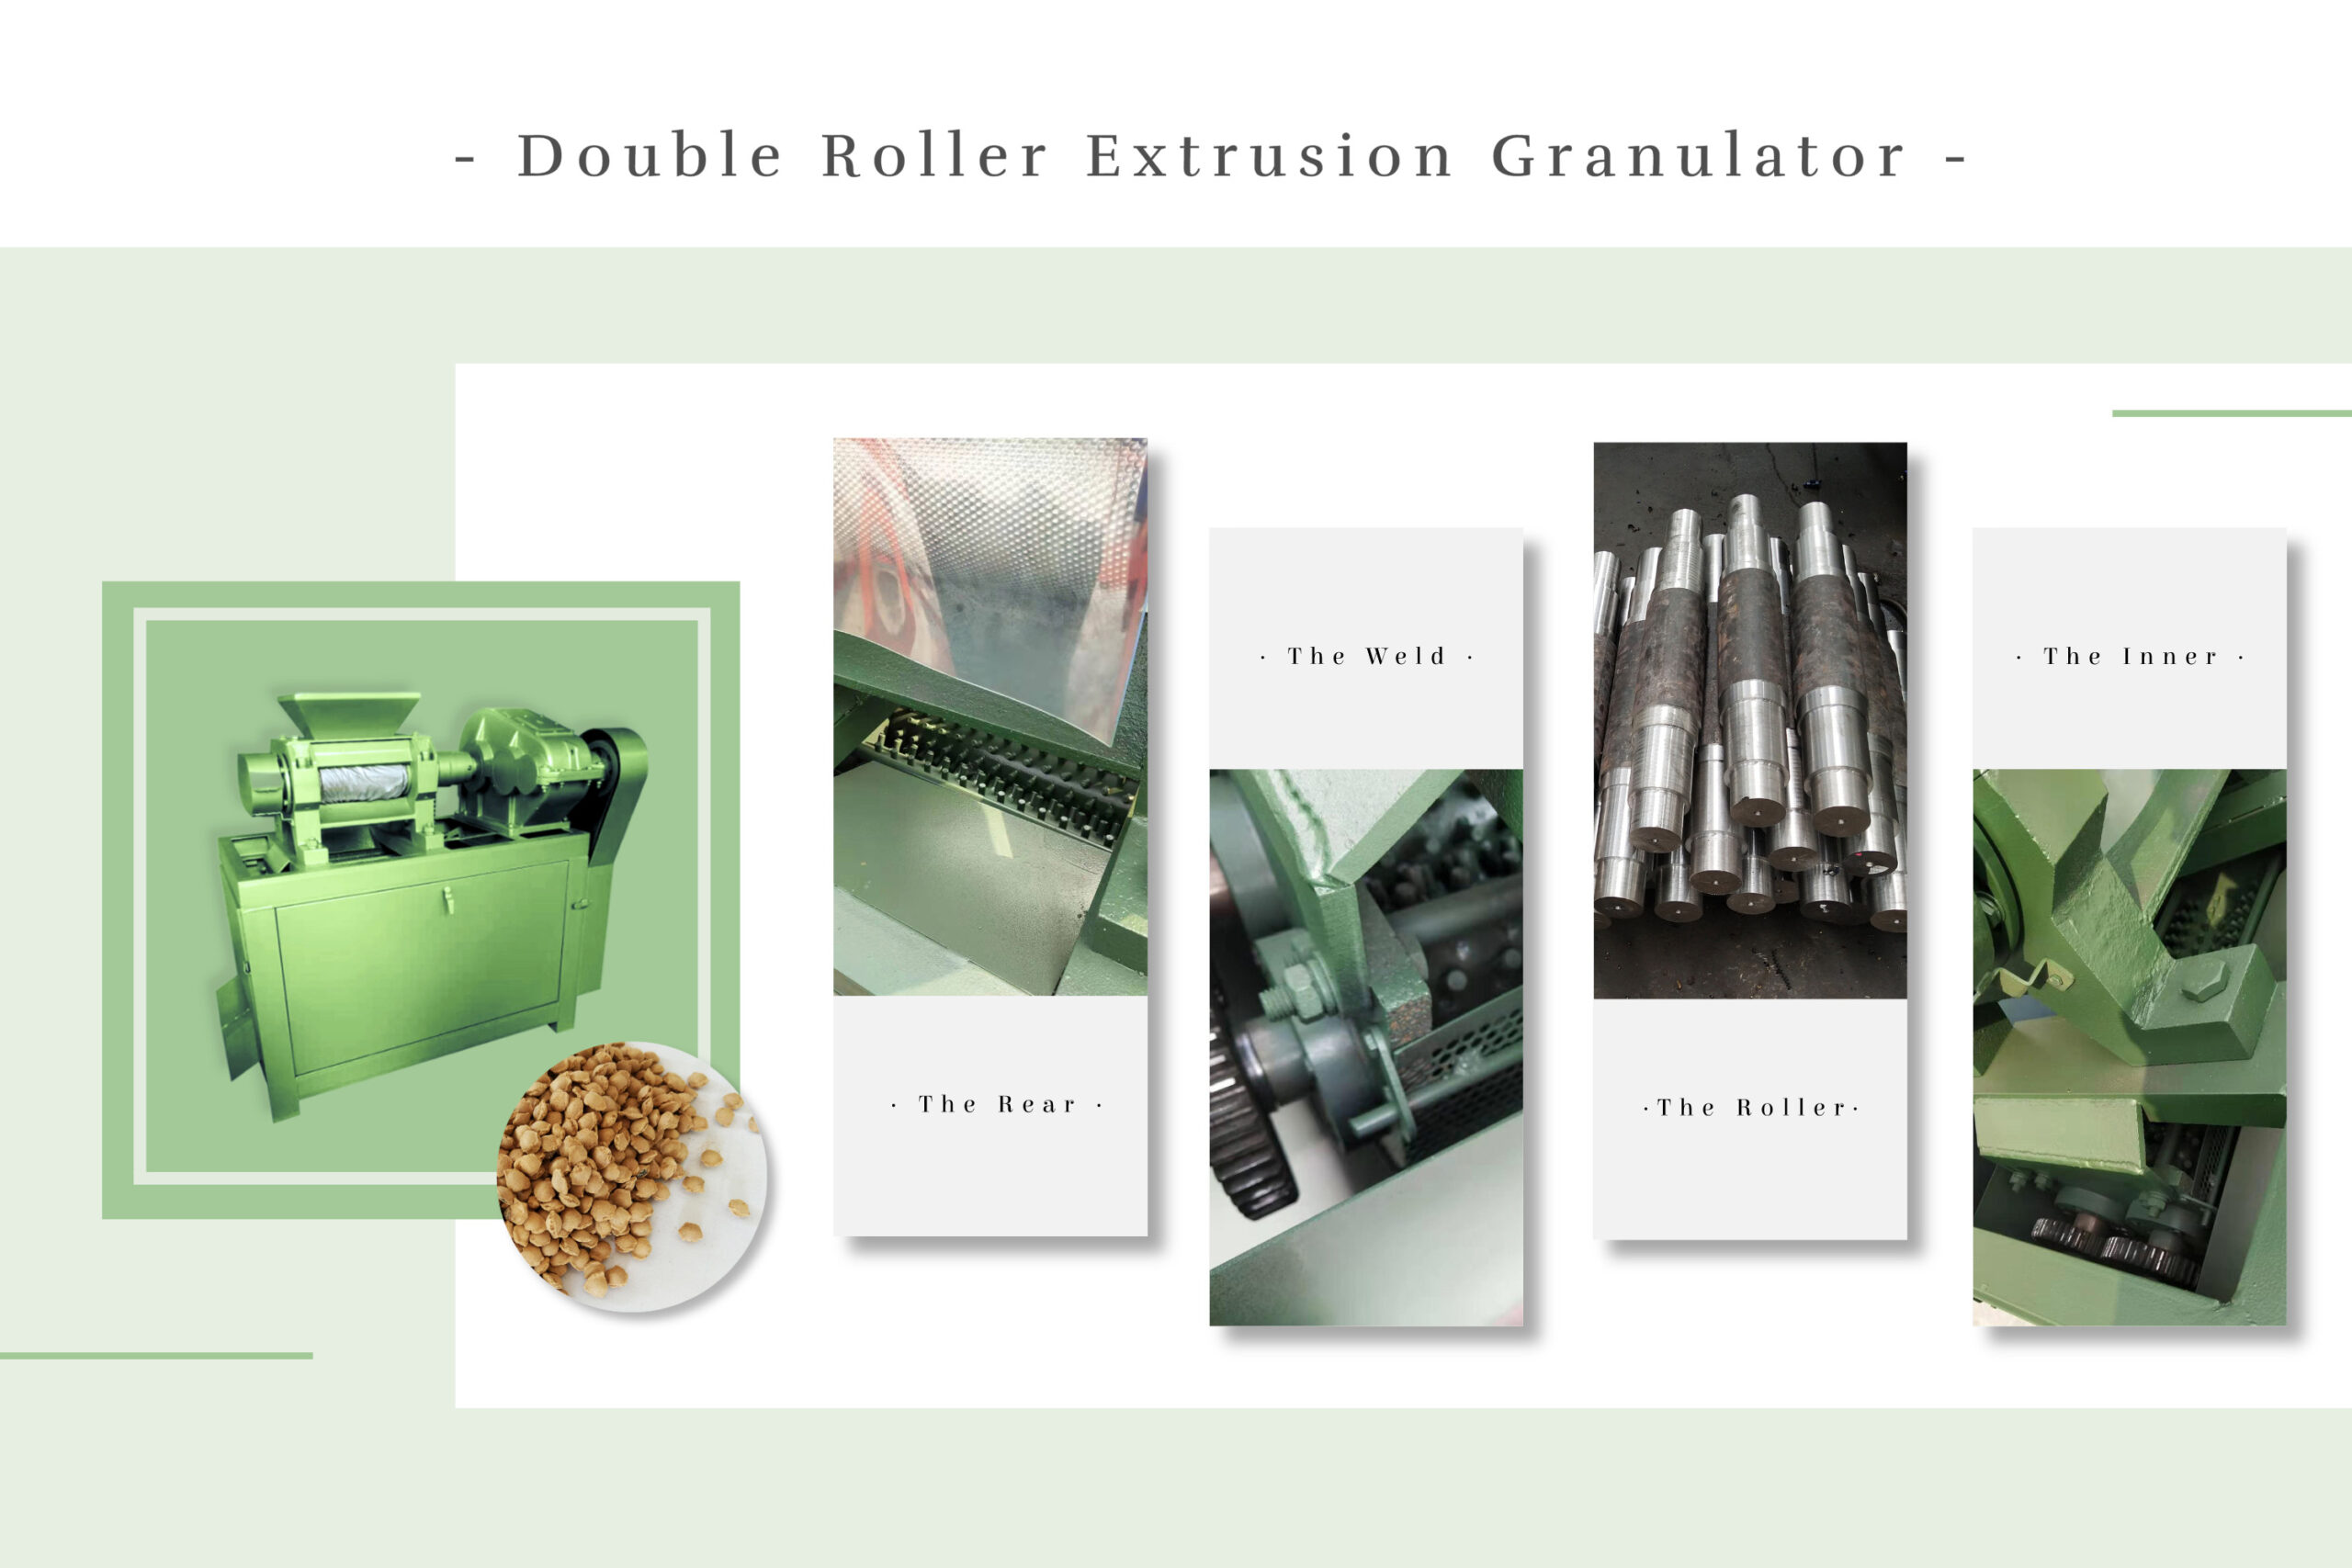 The Details of Double Roller Extrusion Machine